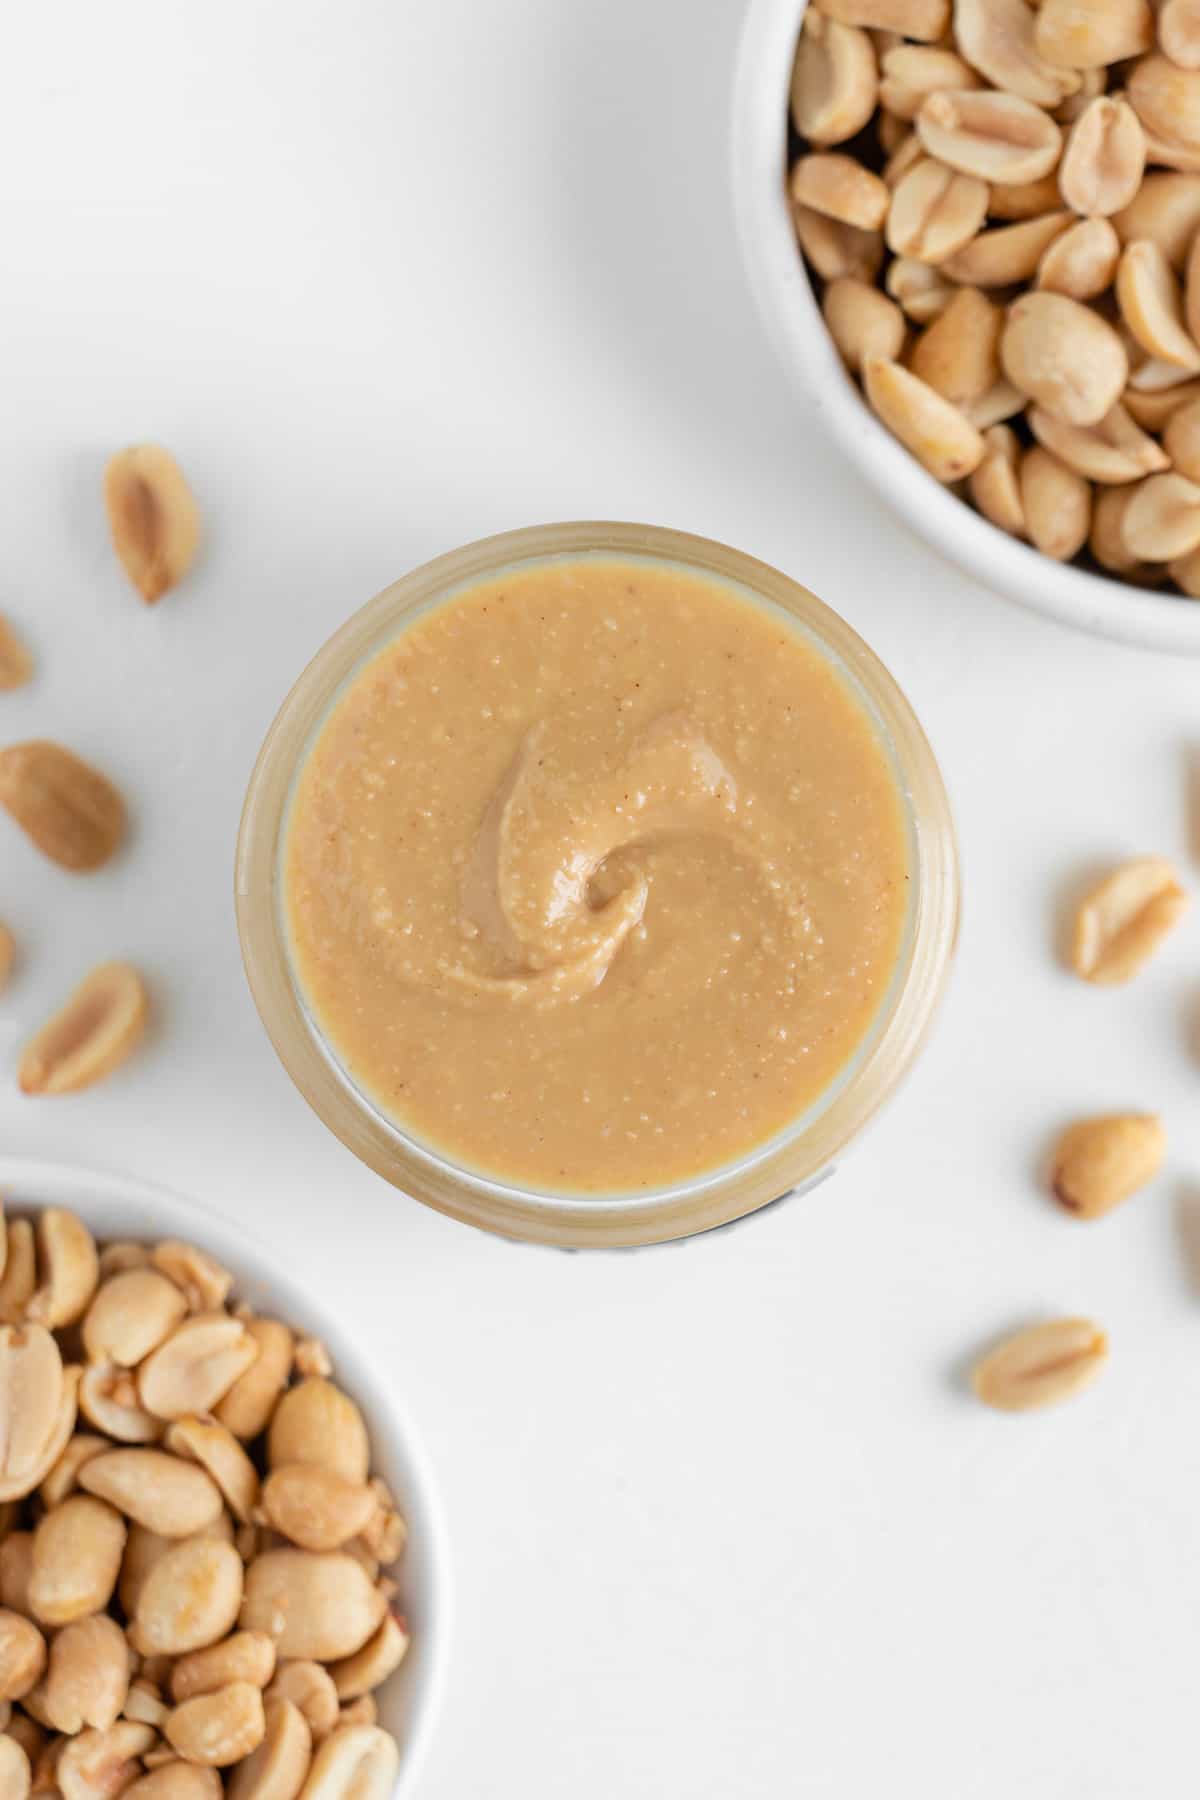 creamy peanut butter inside a glass jar surrounded by chopped peanuts